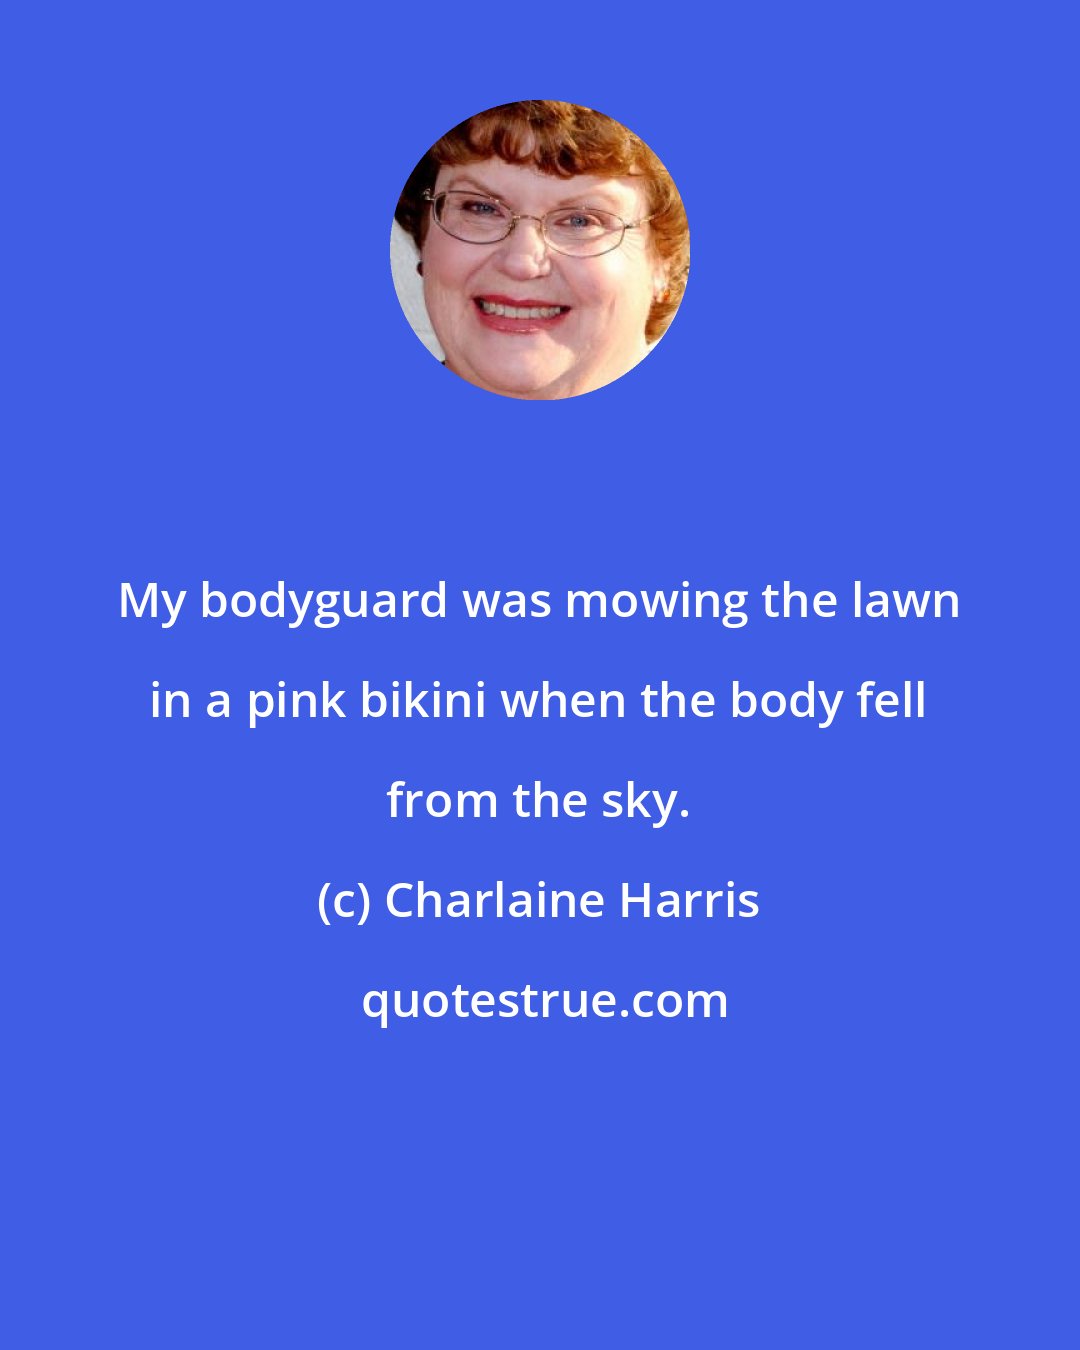 Charlaine Harris: My bodyguard was mowing the lawn in a pink bikini when the body fell from the sky.